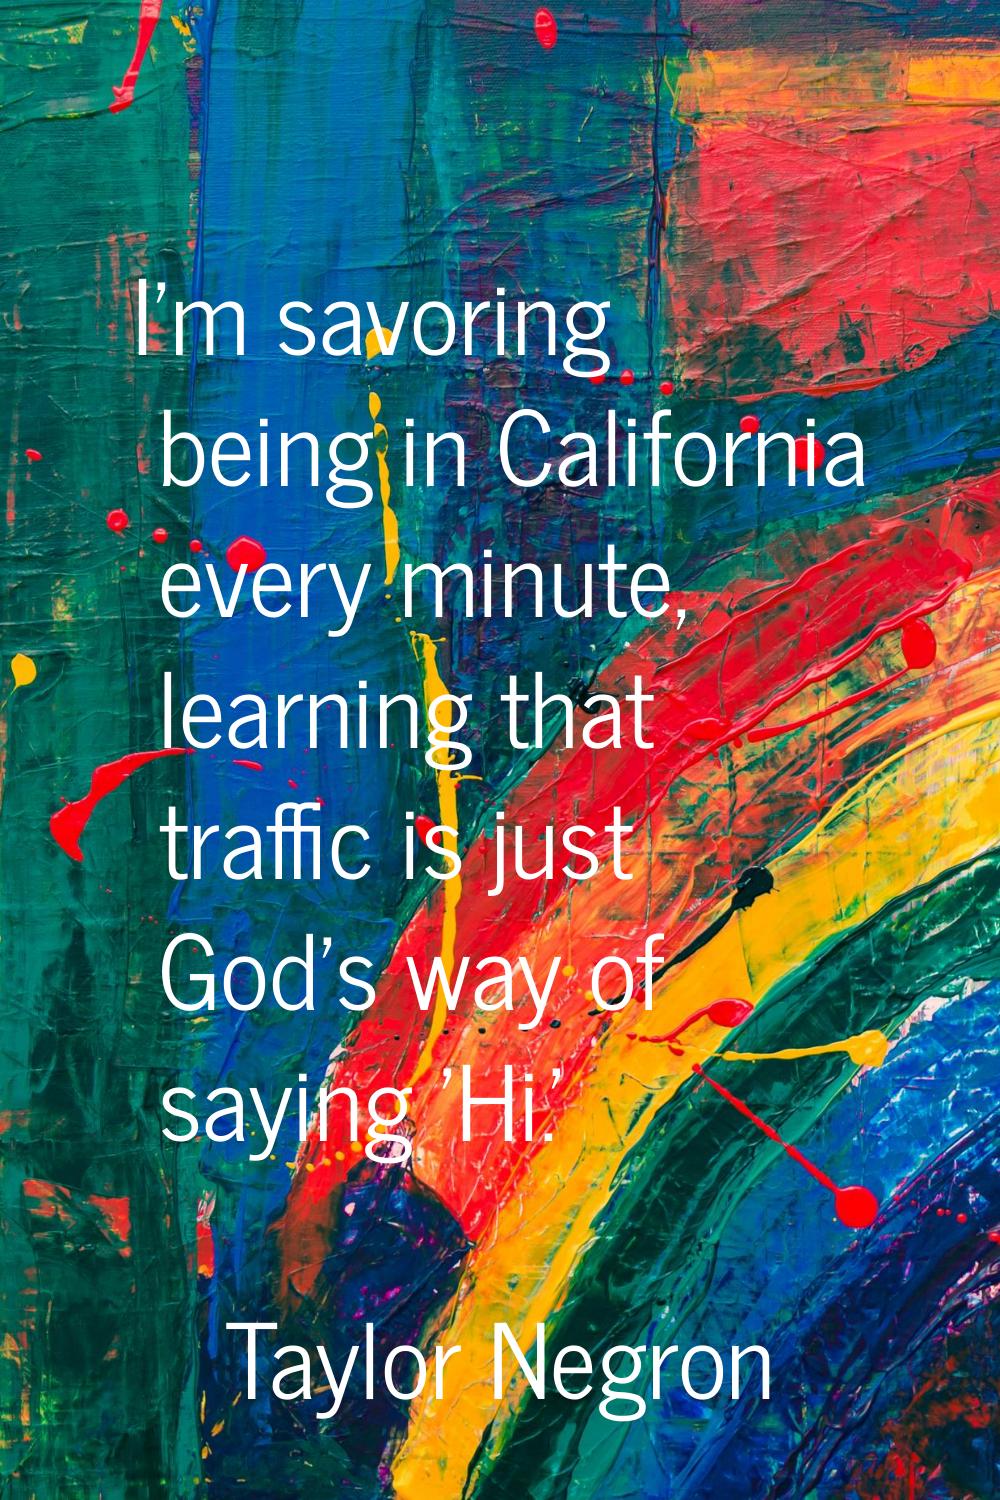 I'm savoring being in California every minute, learning that traffic is just God's way of saying 'H